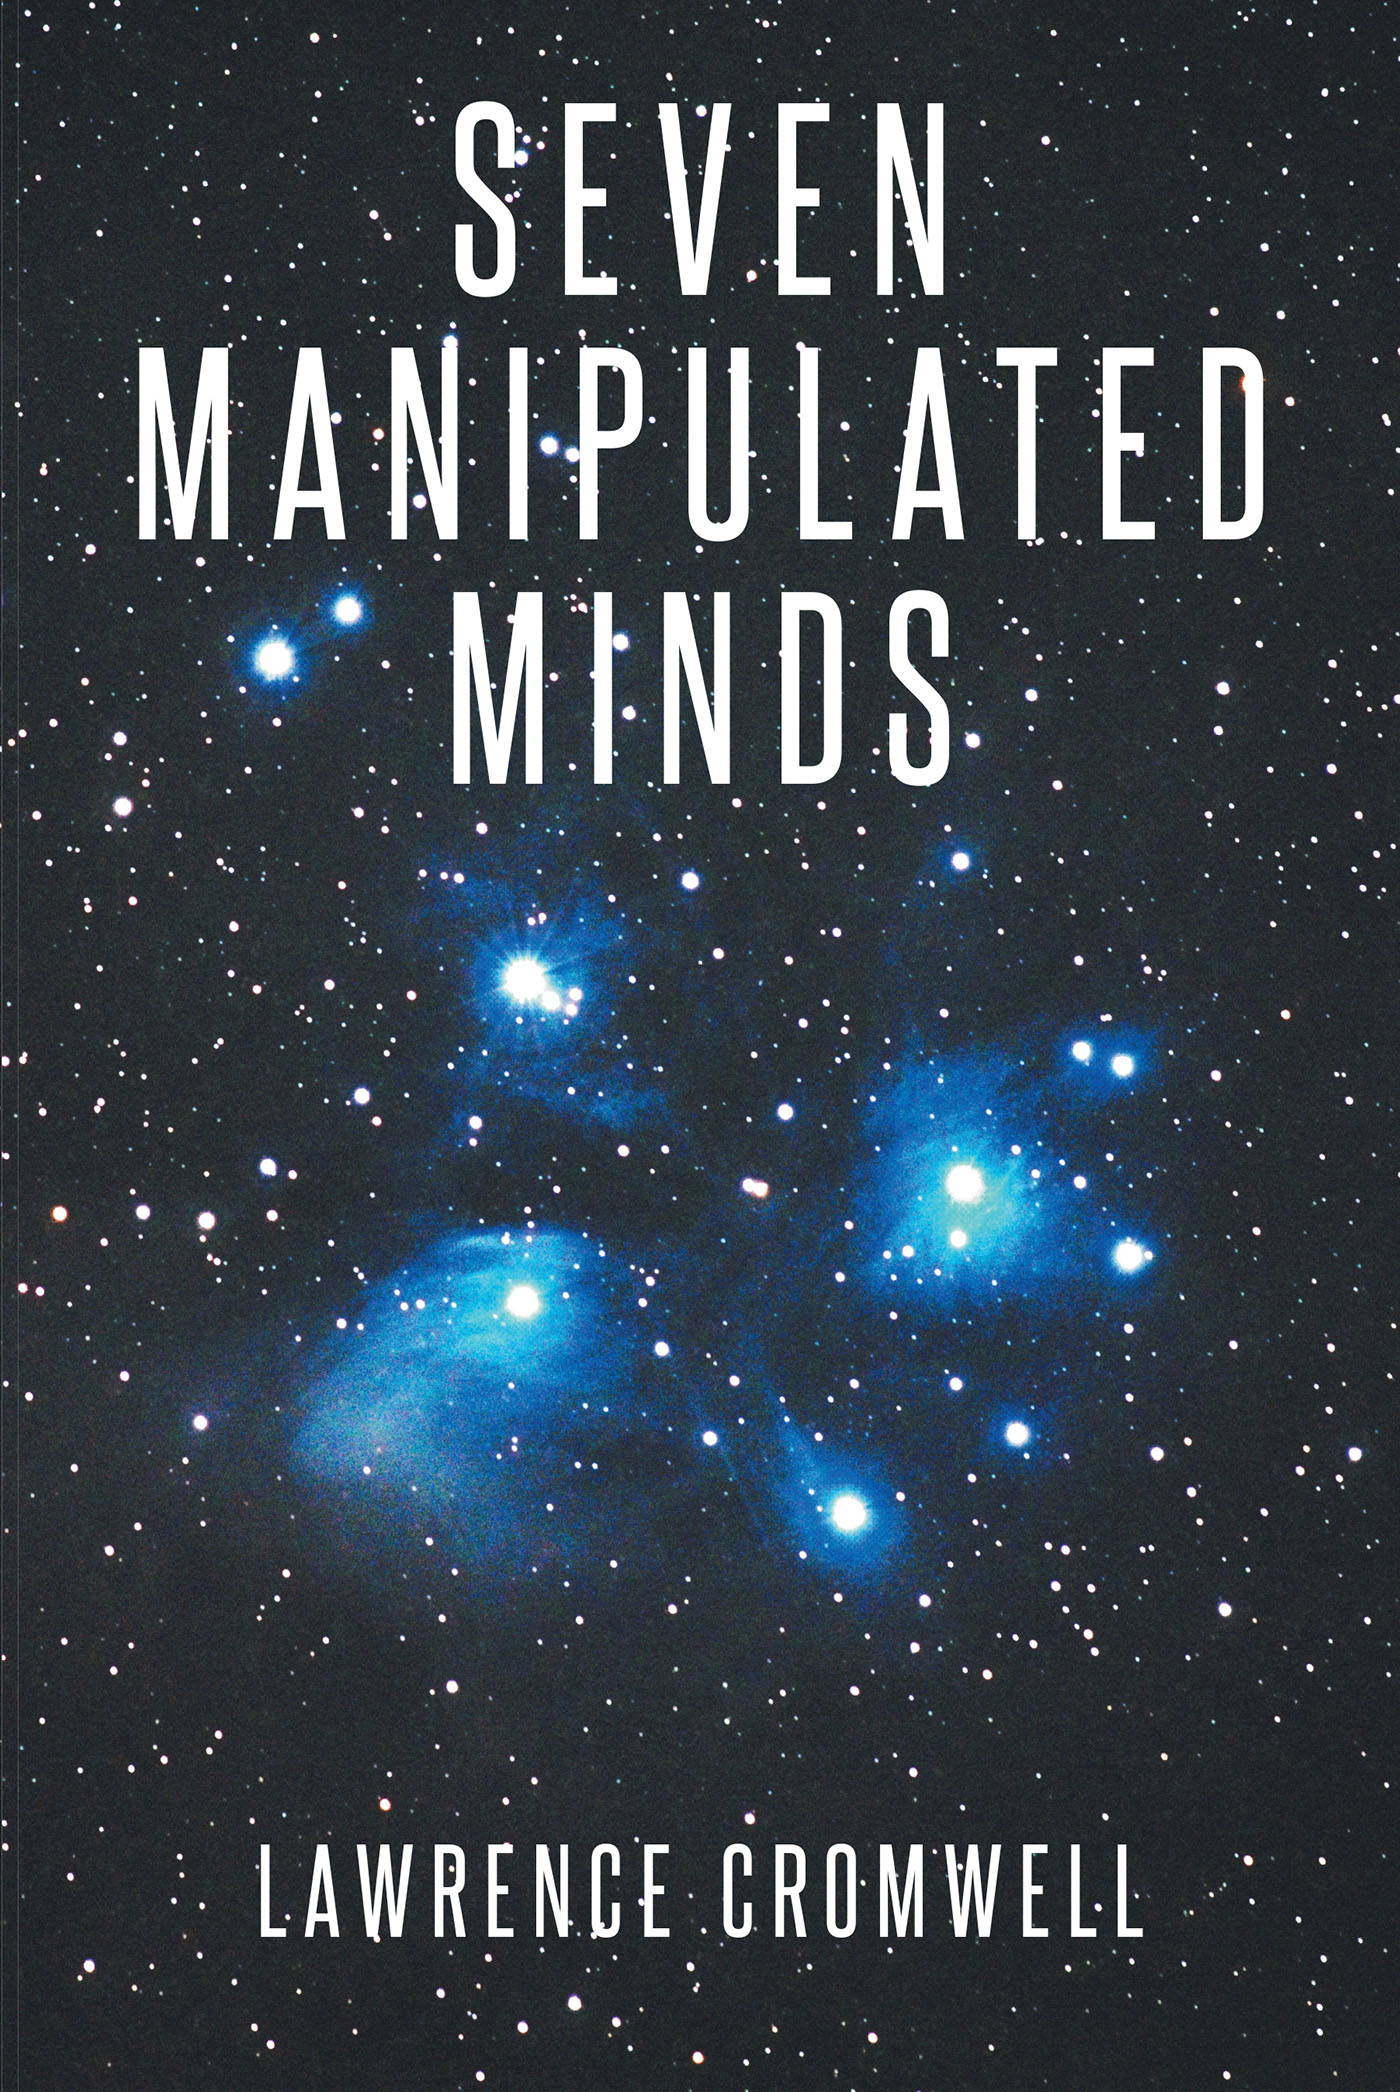 Author Lawrence Cromwell’s New Book "Seven Manipulated Minds" is the Story of a Man Getting Revenge on His Former Tormenters in a Scheme to Achieve His Own True Ambitions